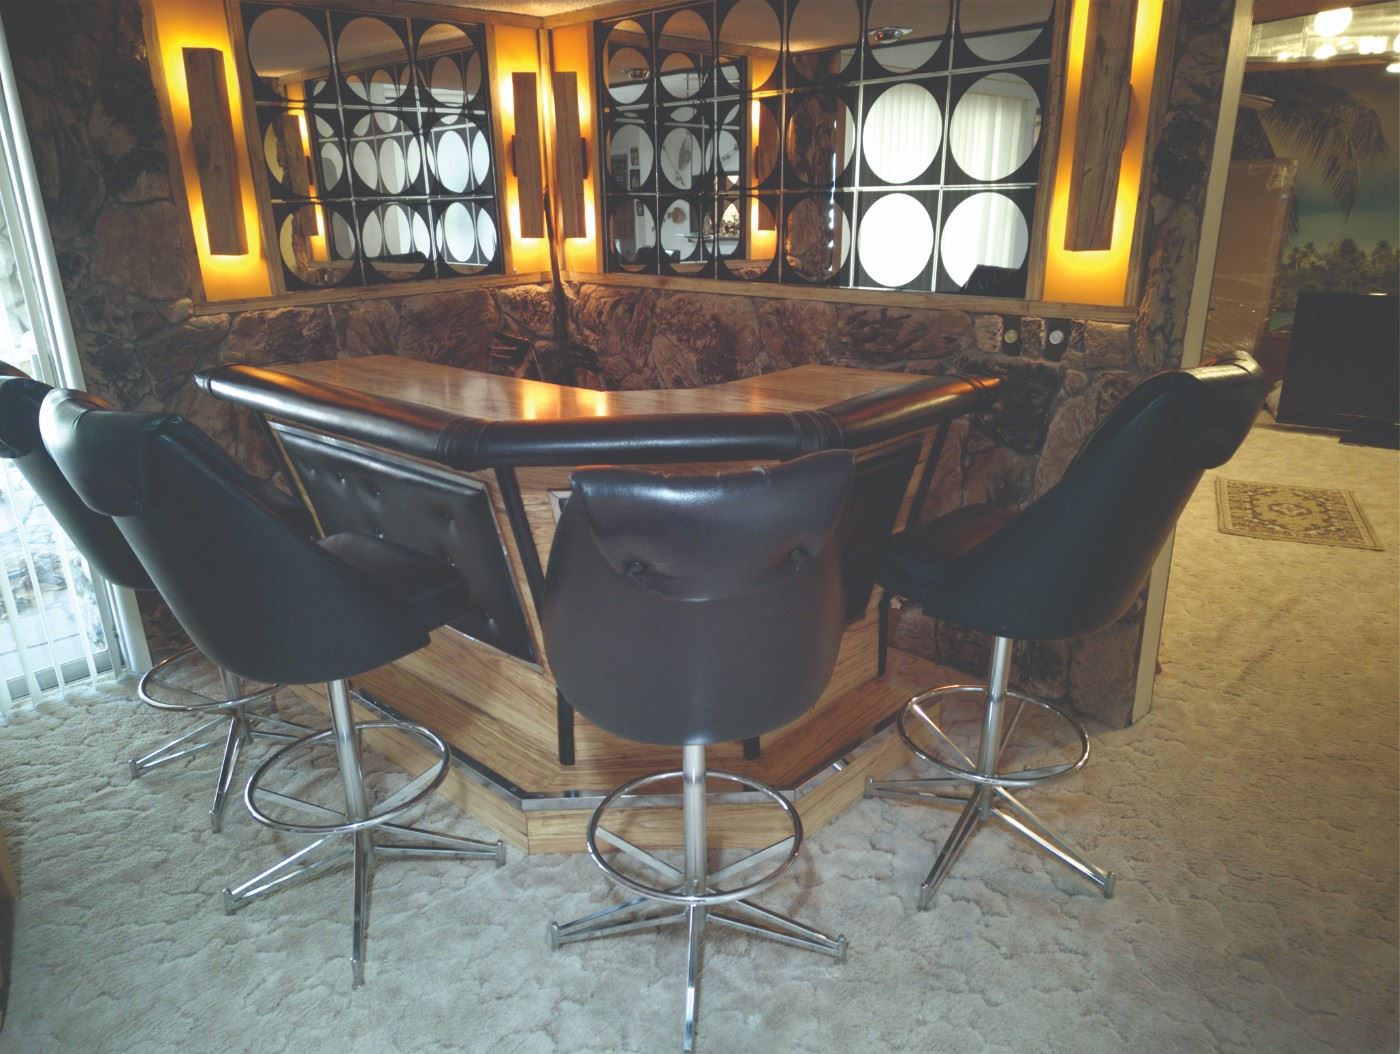 Custom made bar and bar stools. Was $1000.  Now  $250.   Last day!